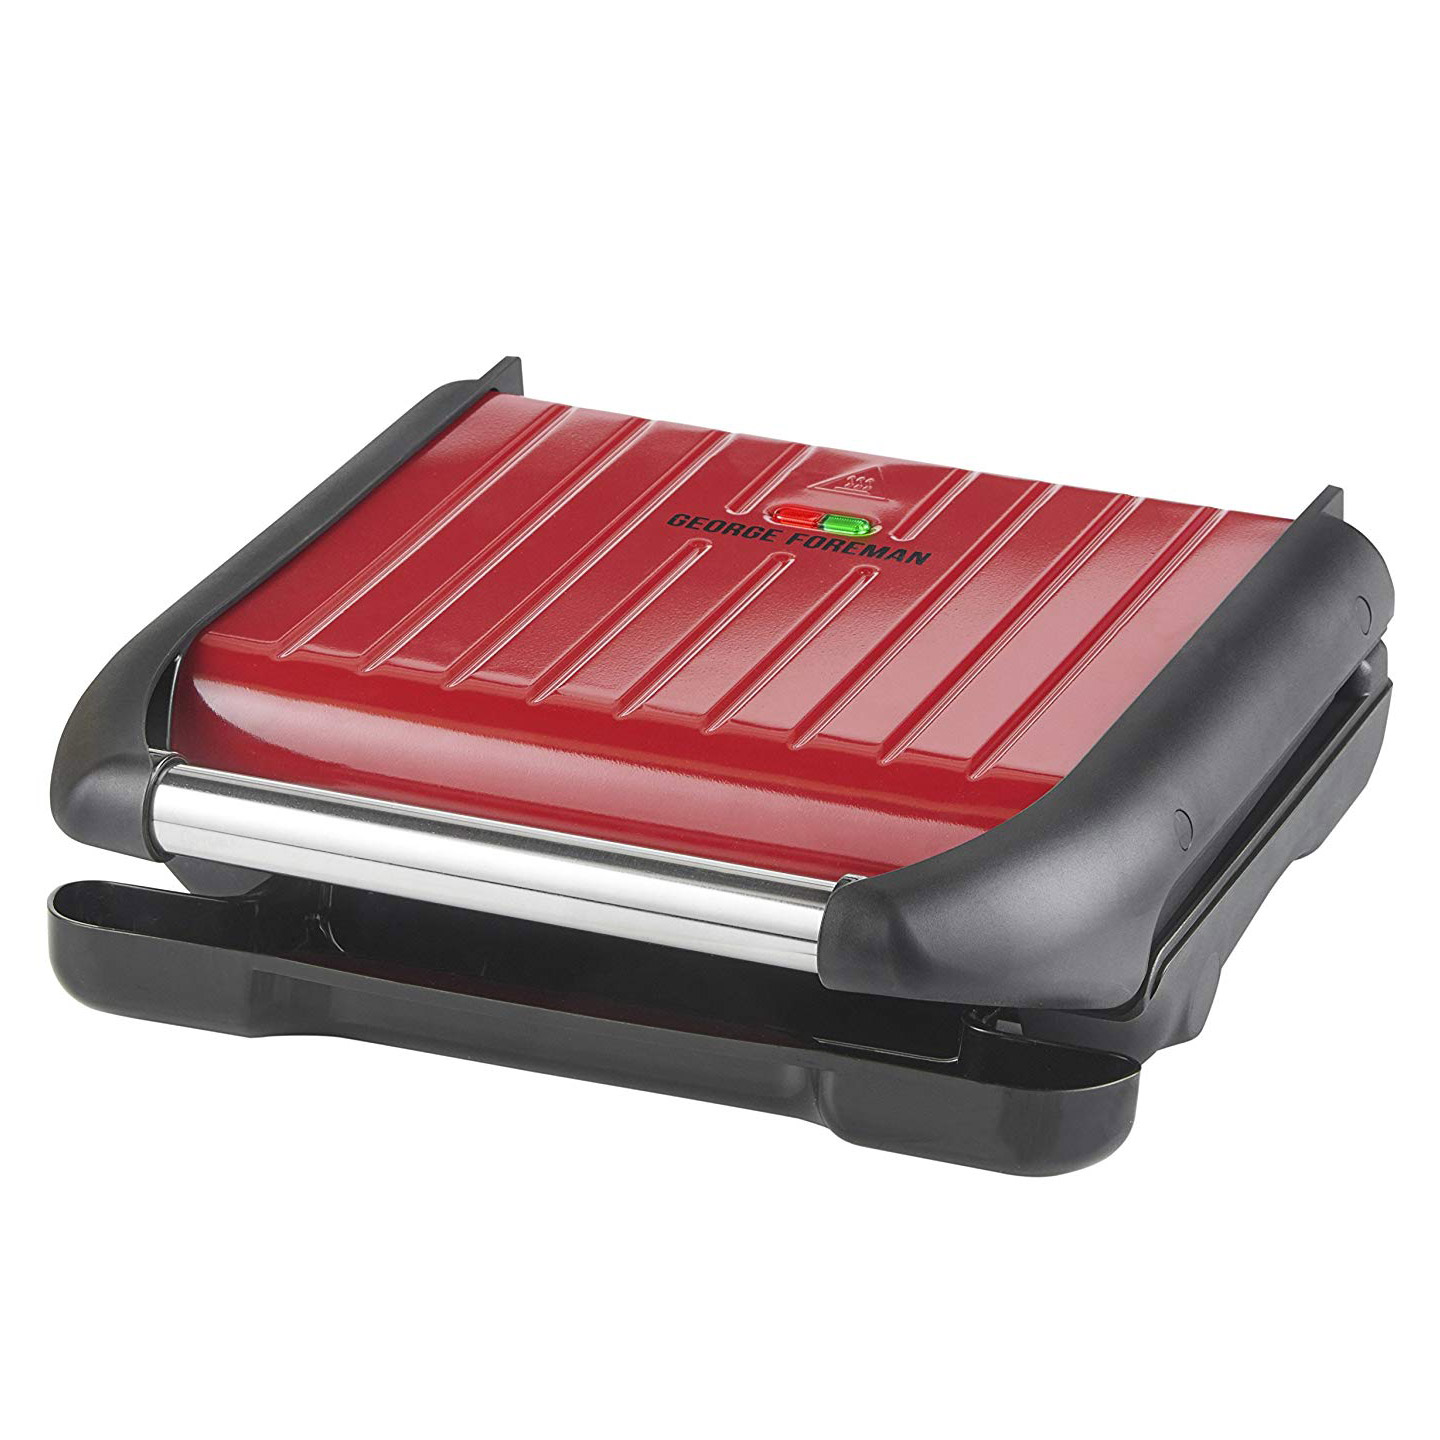 Image of George Foreman 25040 5 Portion Entertaining Health Grill in Red 1650 W